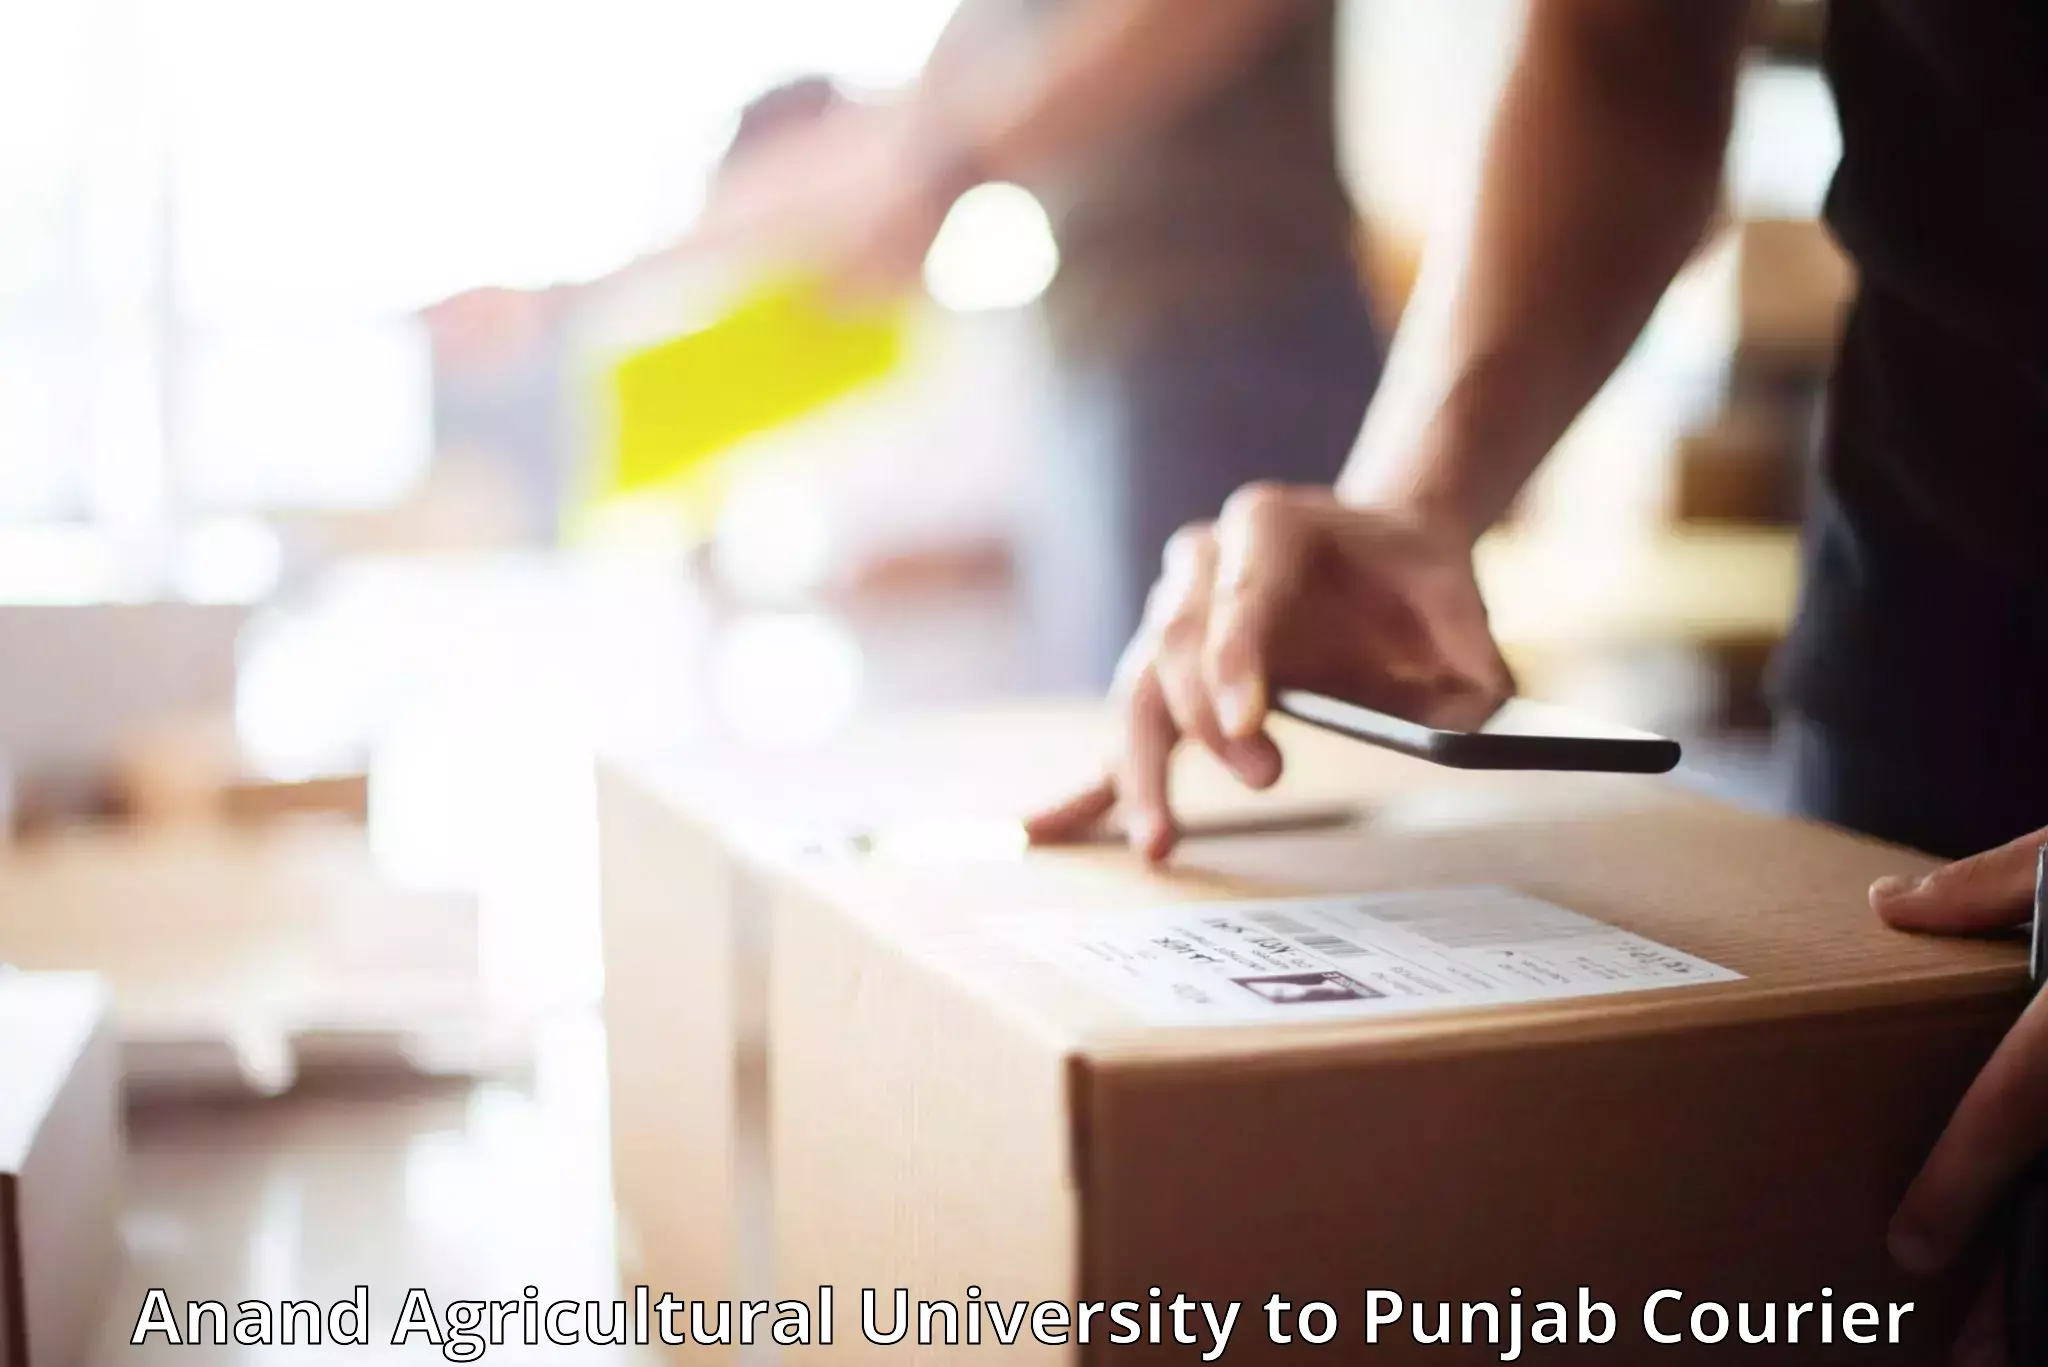 Luggage forwarding service Anand Agricultural University to Bathinda